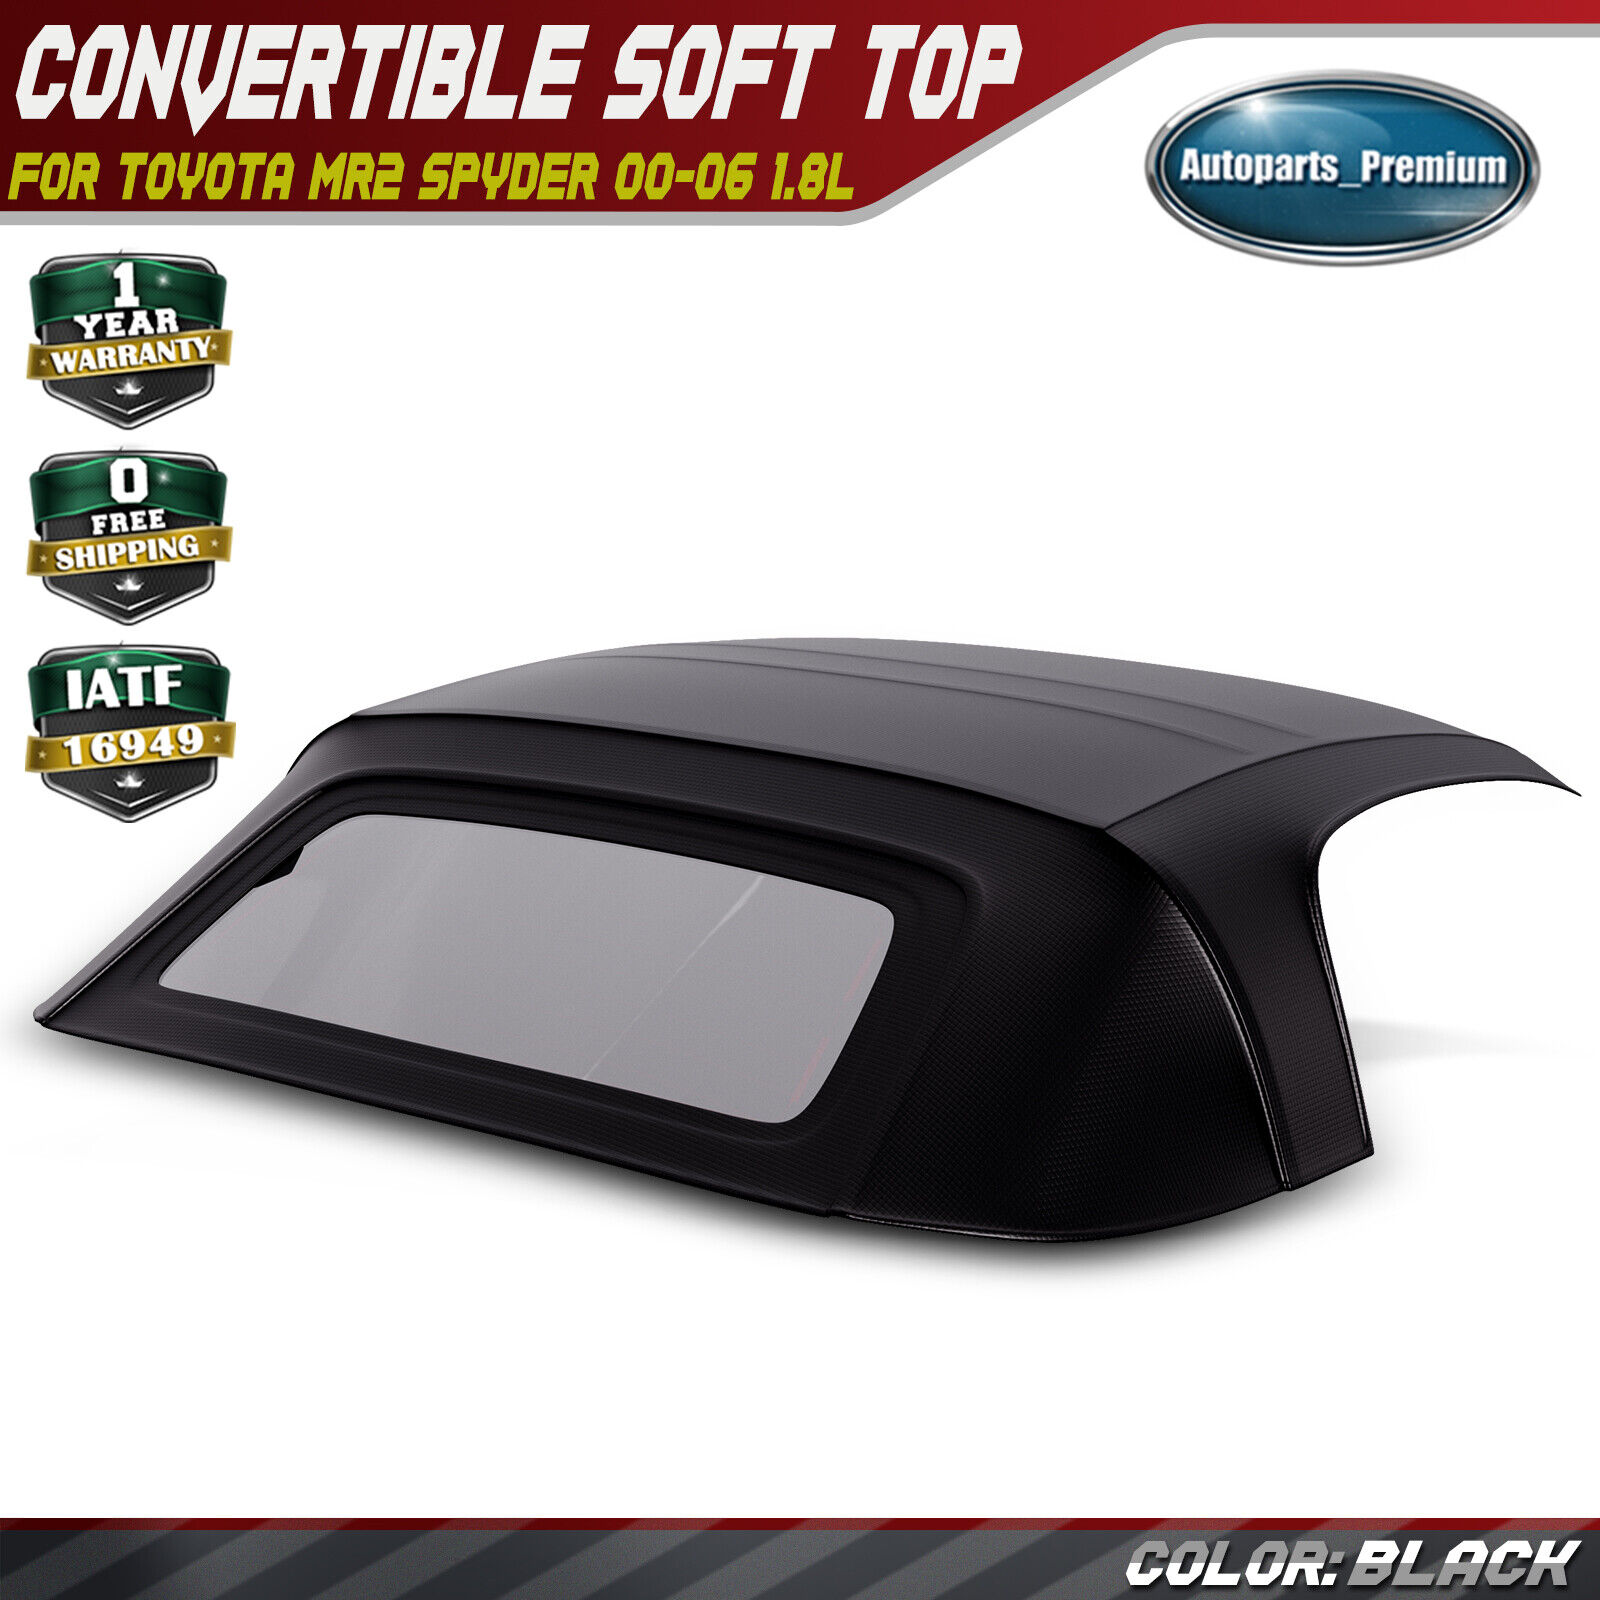 New Black Convertible Soft Top for Toyota MR2 Spyder 00-06 1.8L w/ Glass Window